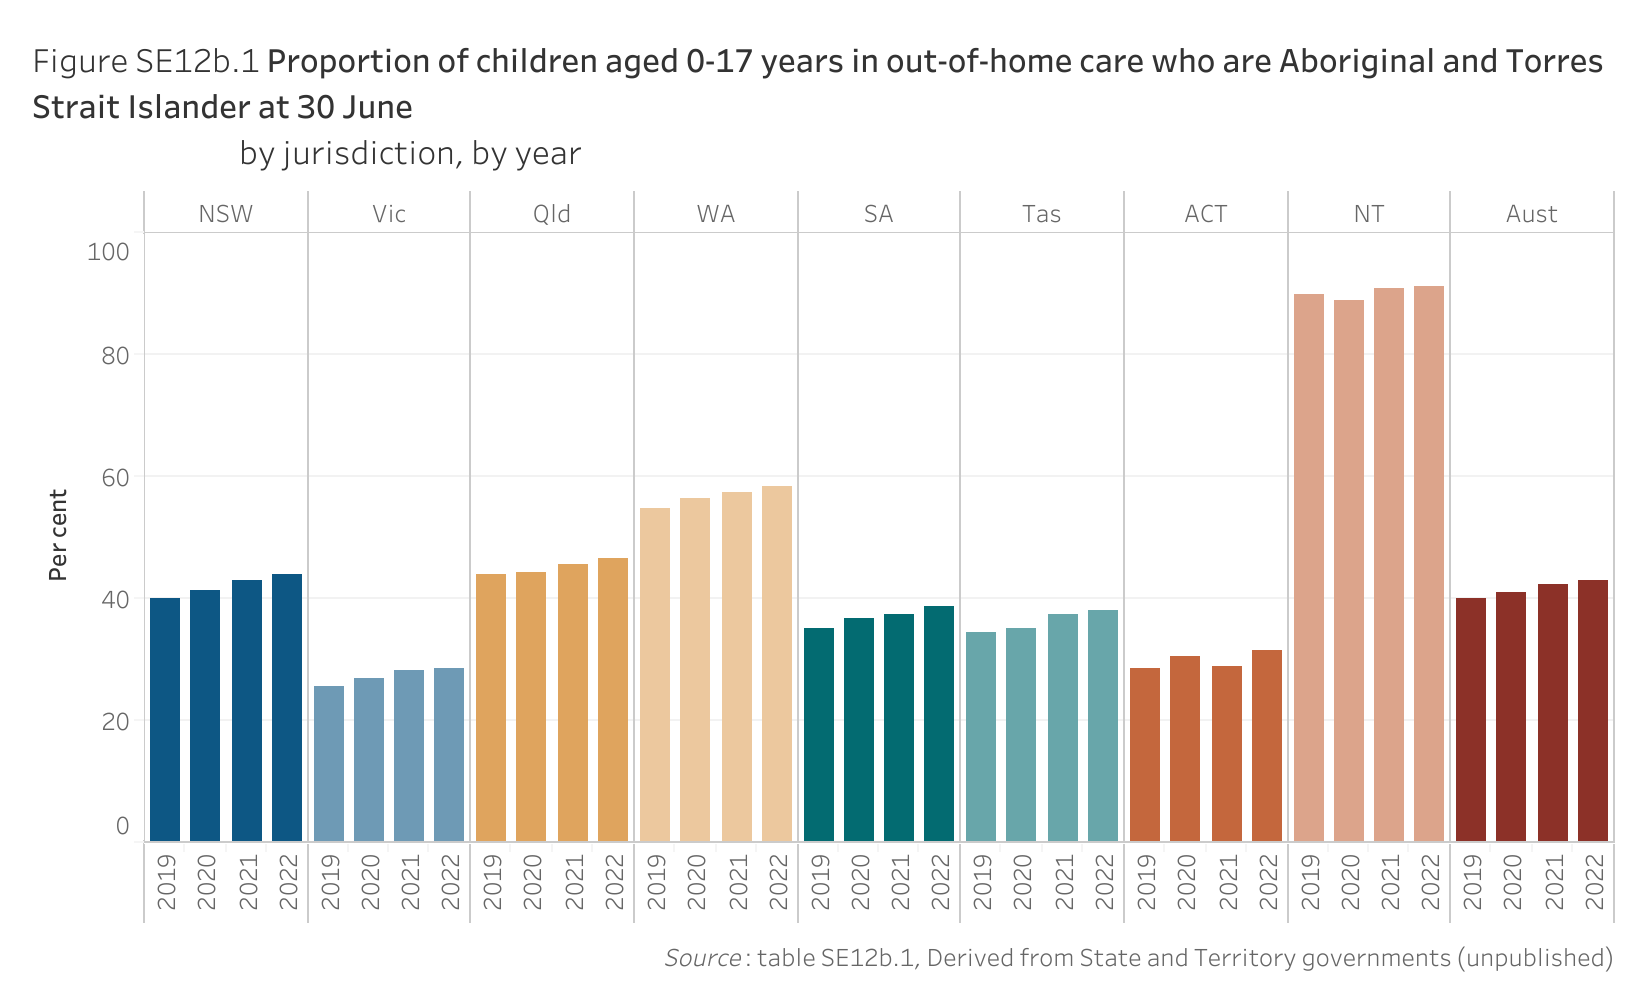 Figure SE12b.1 shows the proportion of children aged 0-17 years in out-of-home care who are Aboriginal and Torres Strait Islander at 30 June, by jurisdiction, by year. More details can be found within the text near this image.